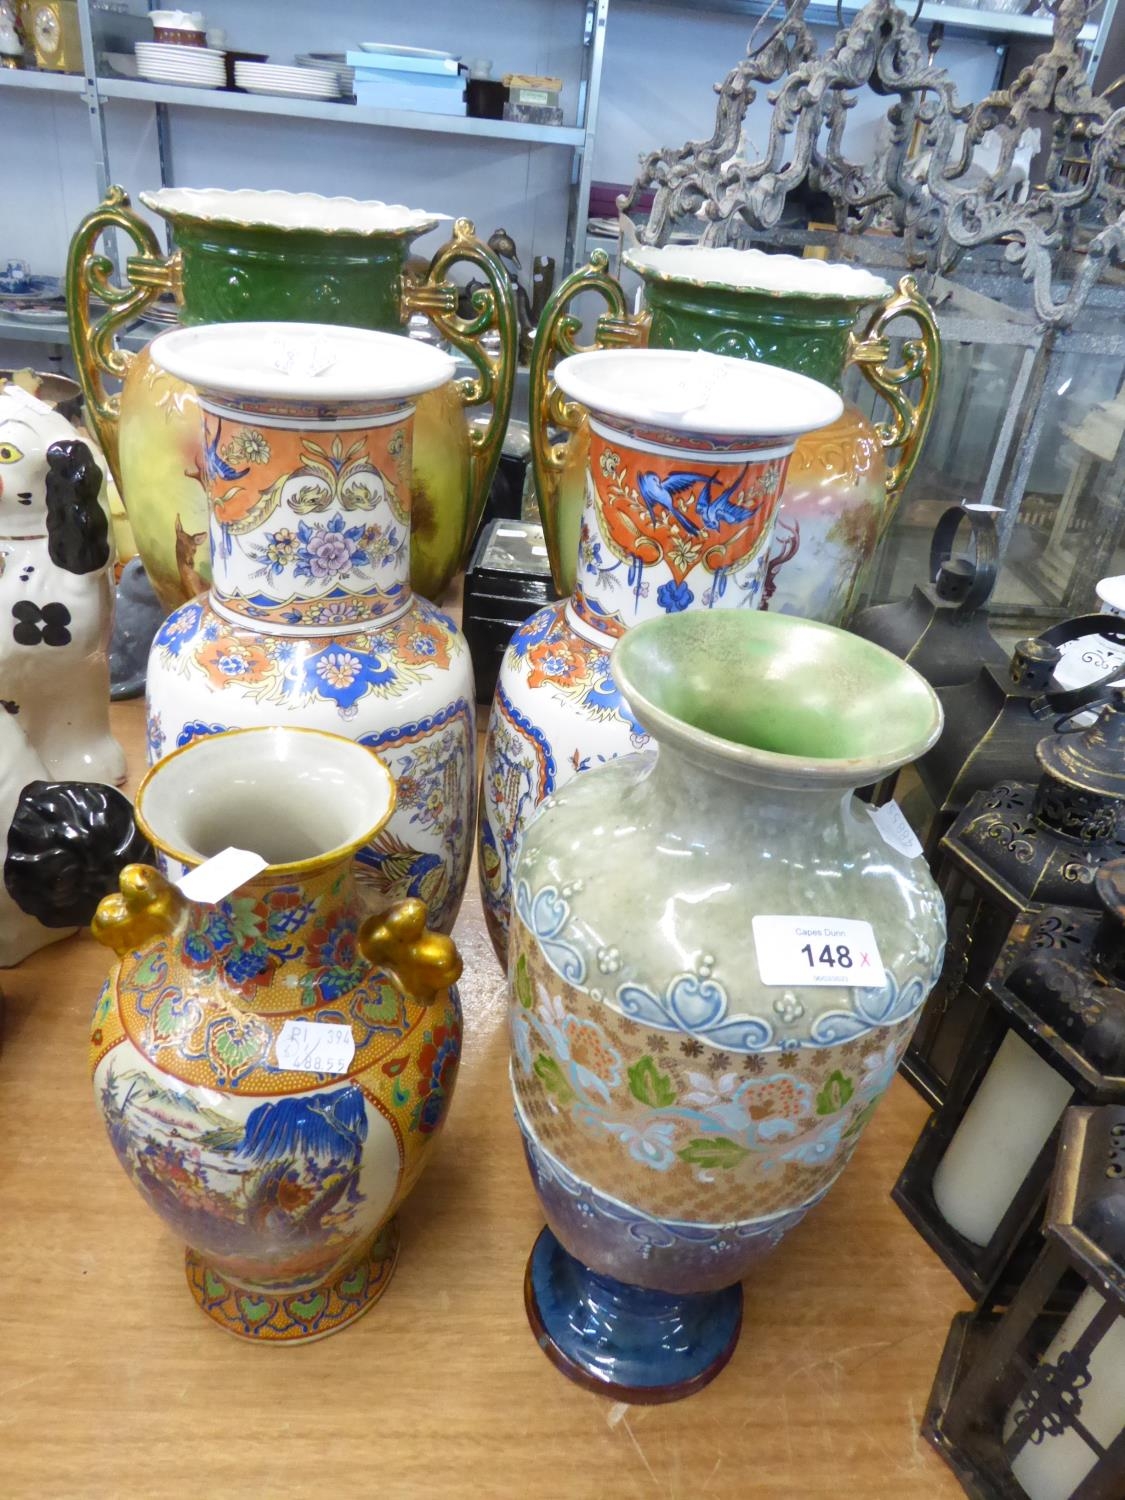 A PAIR OF GEORGE V CERAMIC VASES DECORATED WITH STAGS, PLUS A PAIR OF CHINOISERIE BALUSTER VASES AND